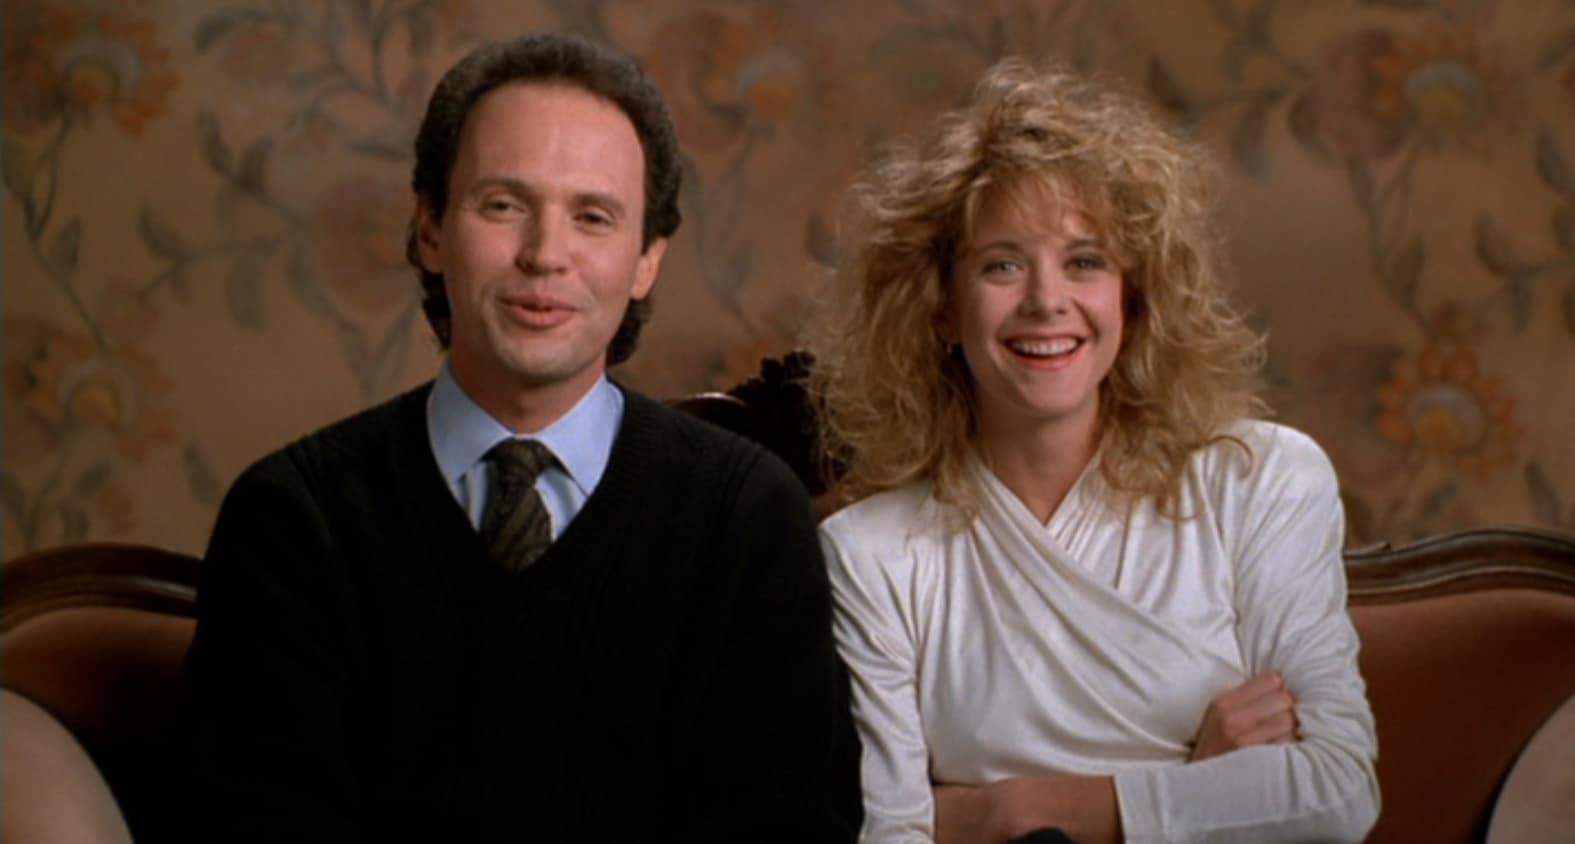 Harry And Sally Interviews